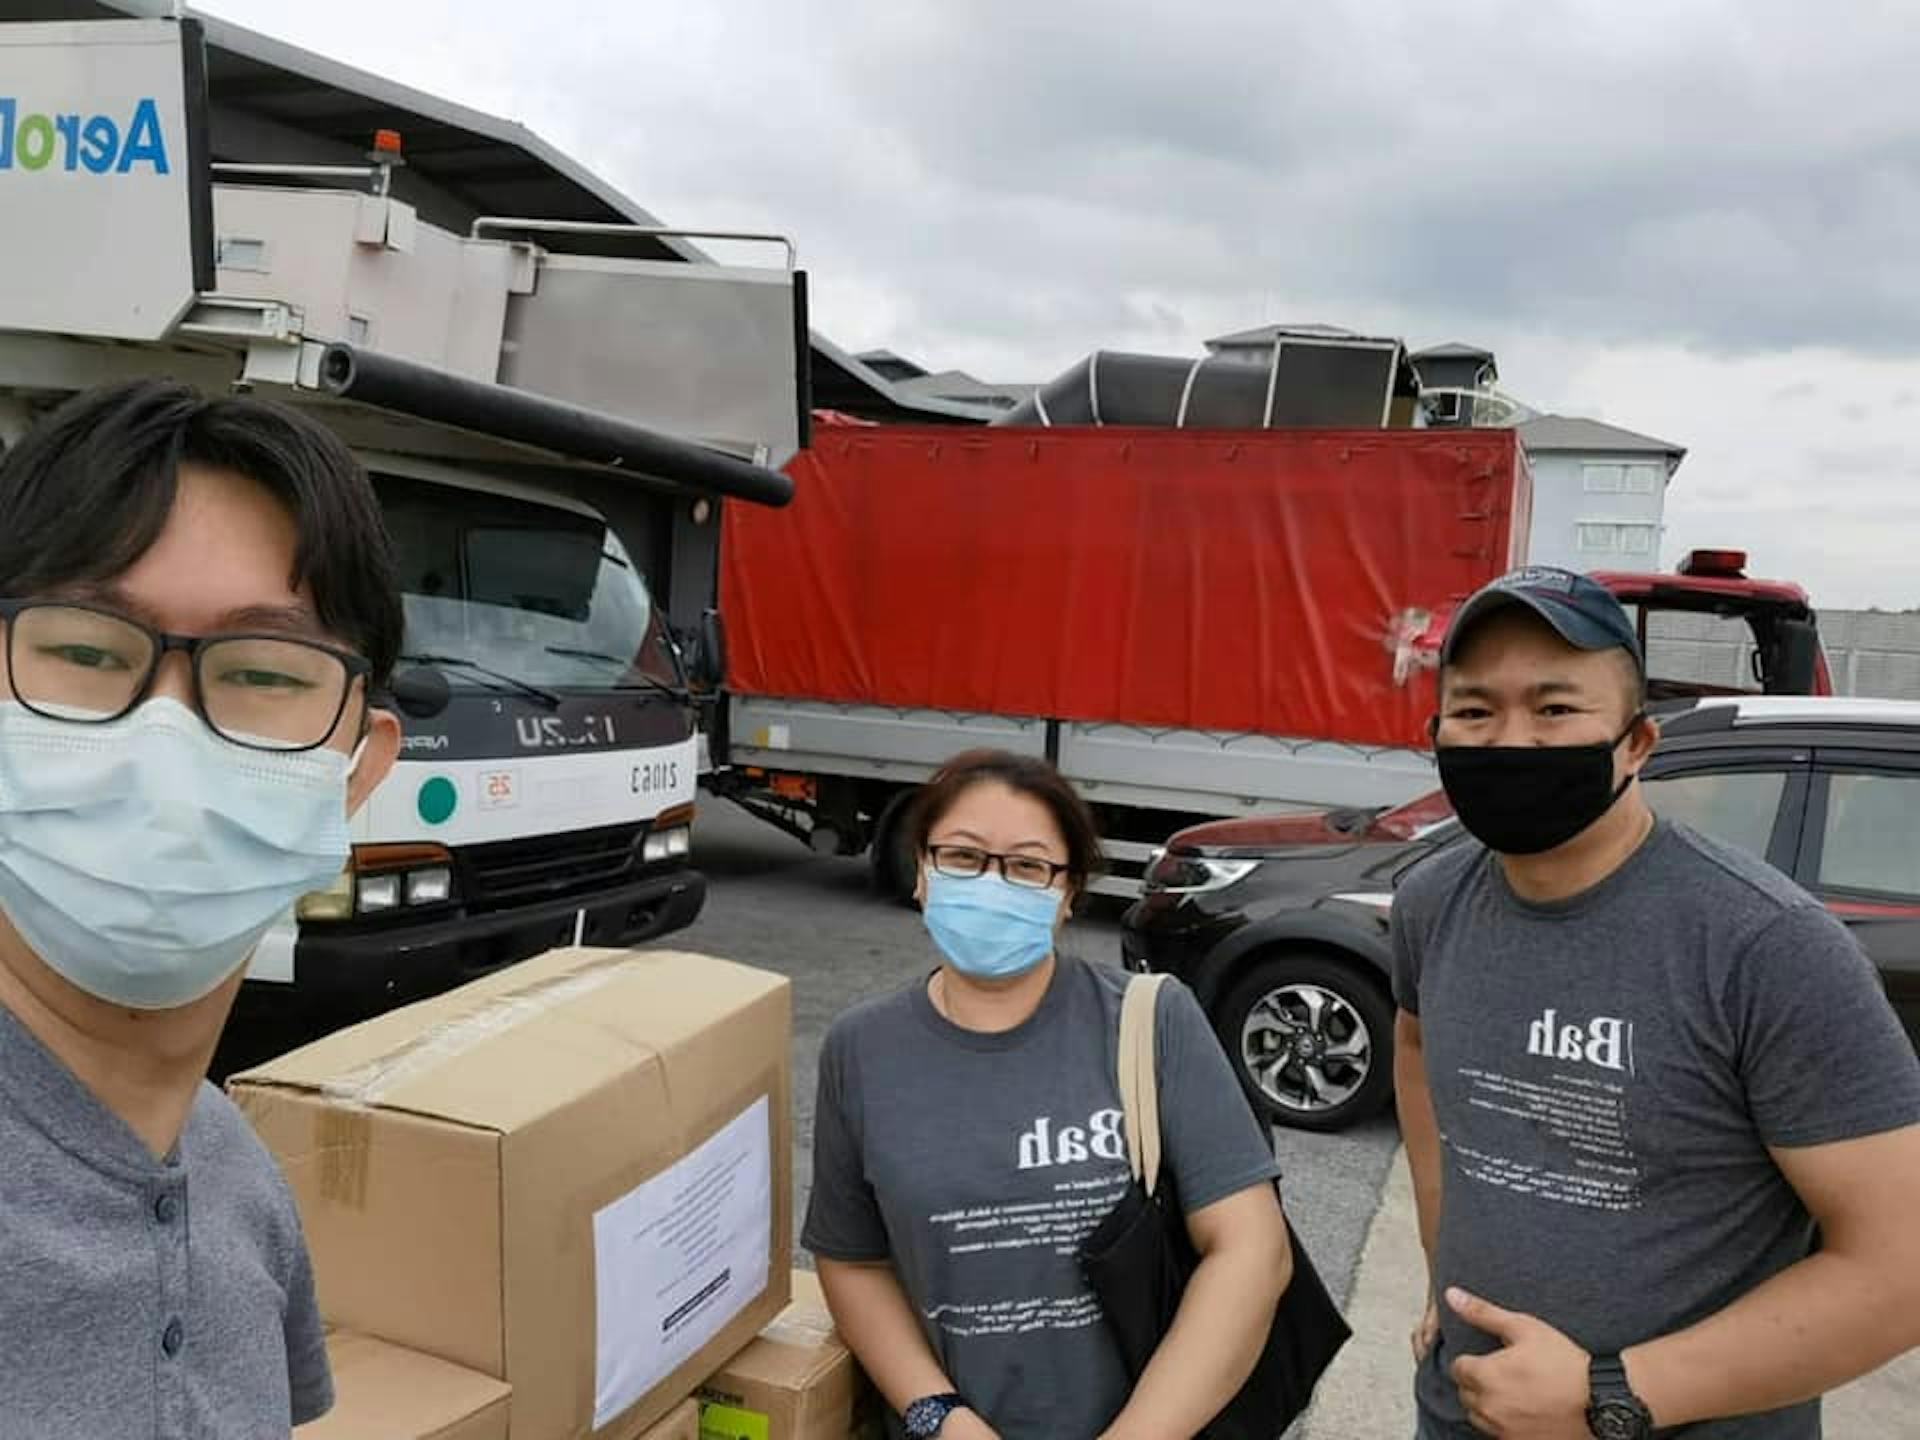 We have successfully crowdfunded and sent PPE supplies to the hospitals and front liners in Sabah (East Malaysia) when the world was hit with the Covid19 pandemic 2 years ago. 